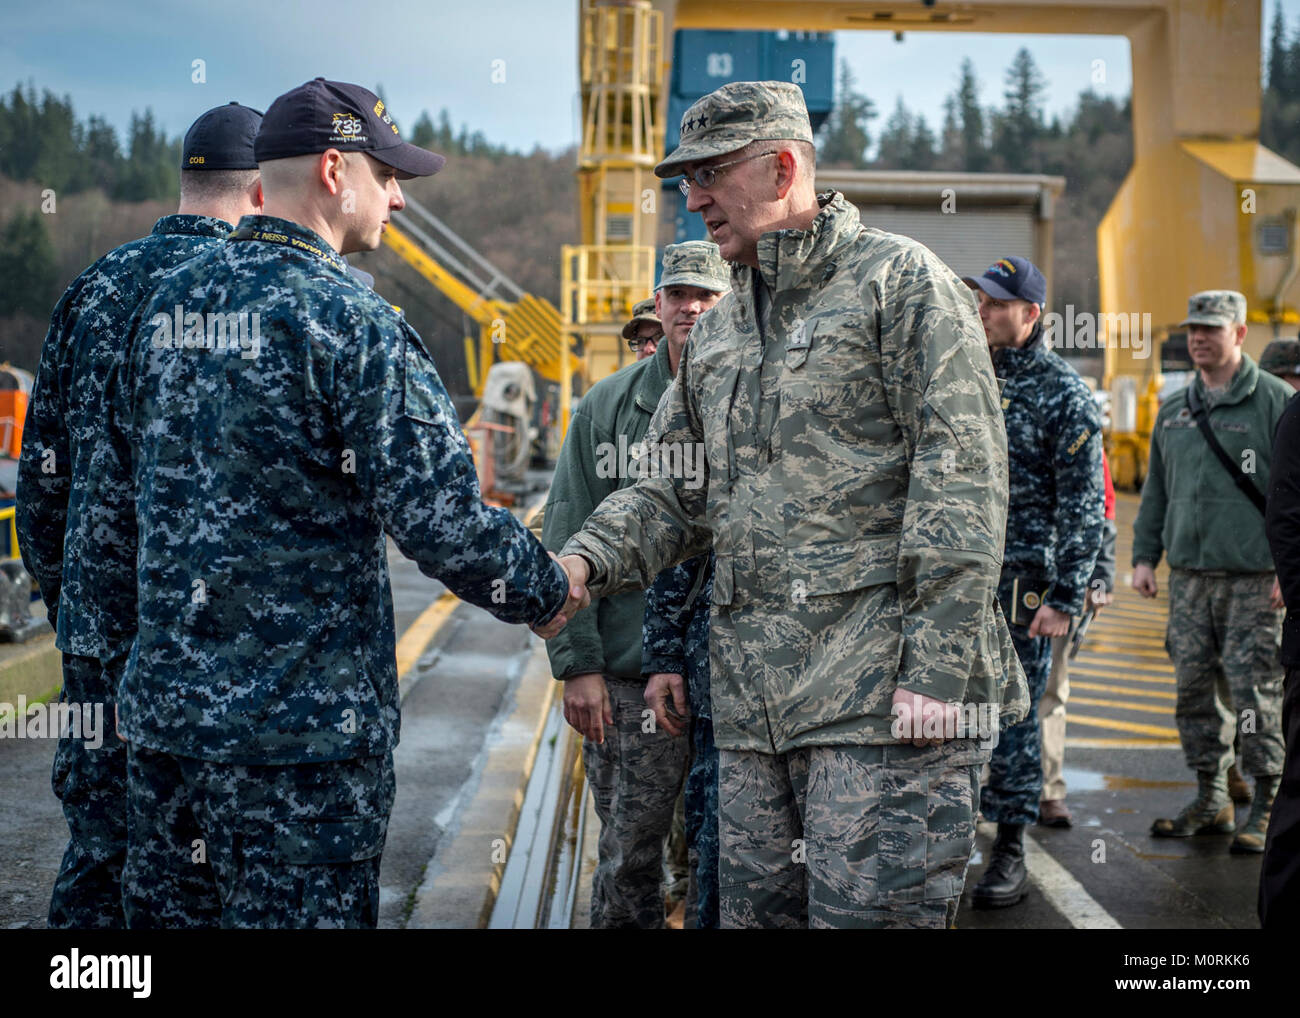 BANGOR, Wash. (Jan. 18, 2018) - U.S. Air Force Gen. John Hyten (right), commander of U.S. Strategic Command, arrives at the Ohio-class ballistic missile submarine USS Pennsylvania (SSBN 735) and shakes hands with Gold Crew Chief of the Boat, U.S. Navy, Master Chief Missile Technician (SS) Petty Officer Dylan Lapinski, at Naval Base Kitsap-Bangor, Wash., Jan 18, 2018. Hyten visited staff and facilities assigned to Commander Submarine Group 9  to see the operations of one leg of the nuclear triad. (U.S. Navy Stock Photo